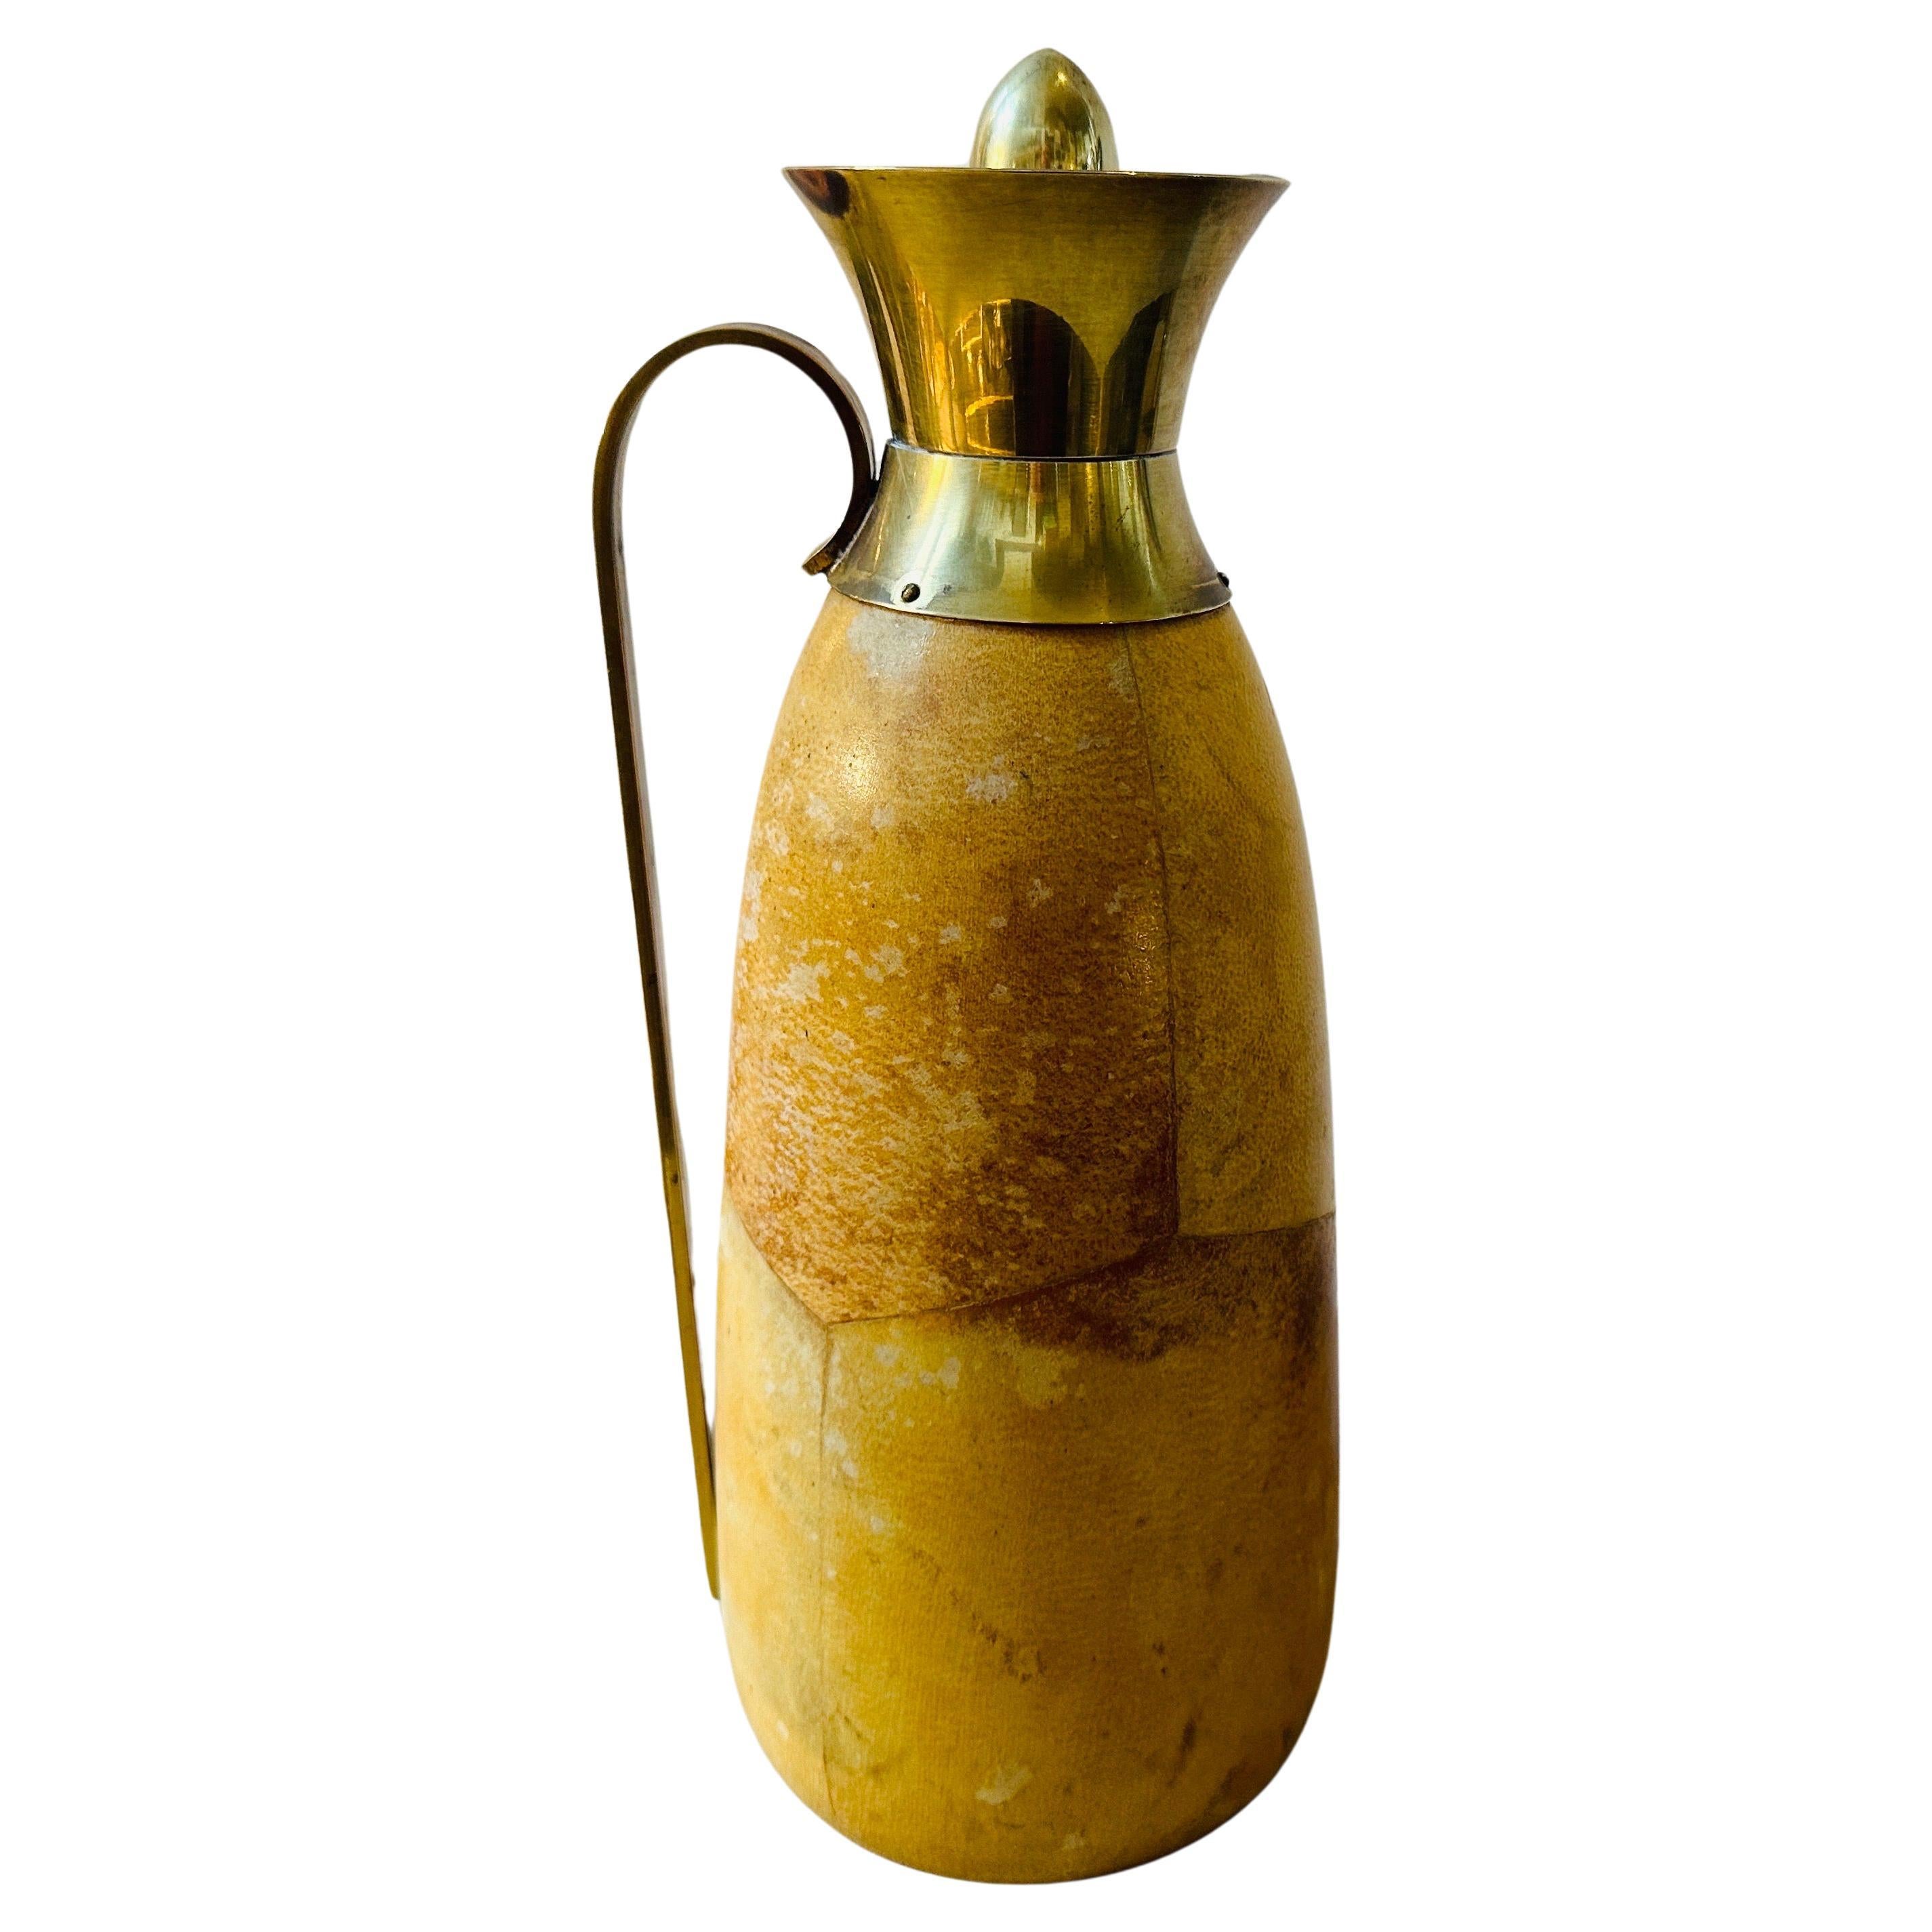 1950s Mid-Century Modern Goatskin and Brass Thermos Carafe by Aldo Tura For Sale